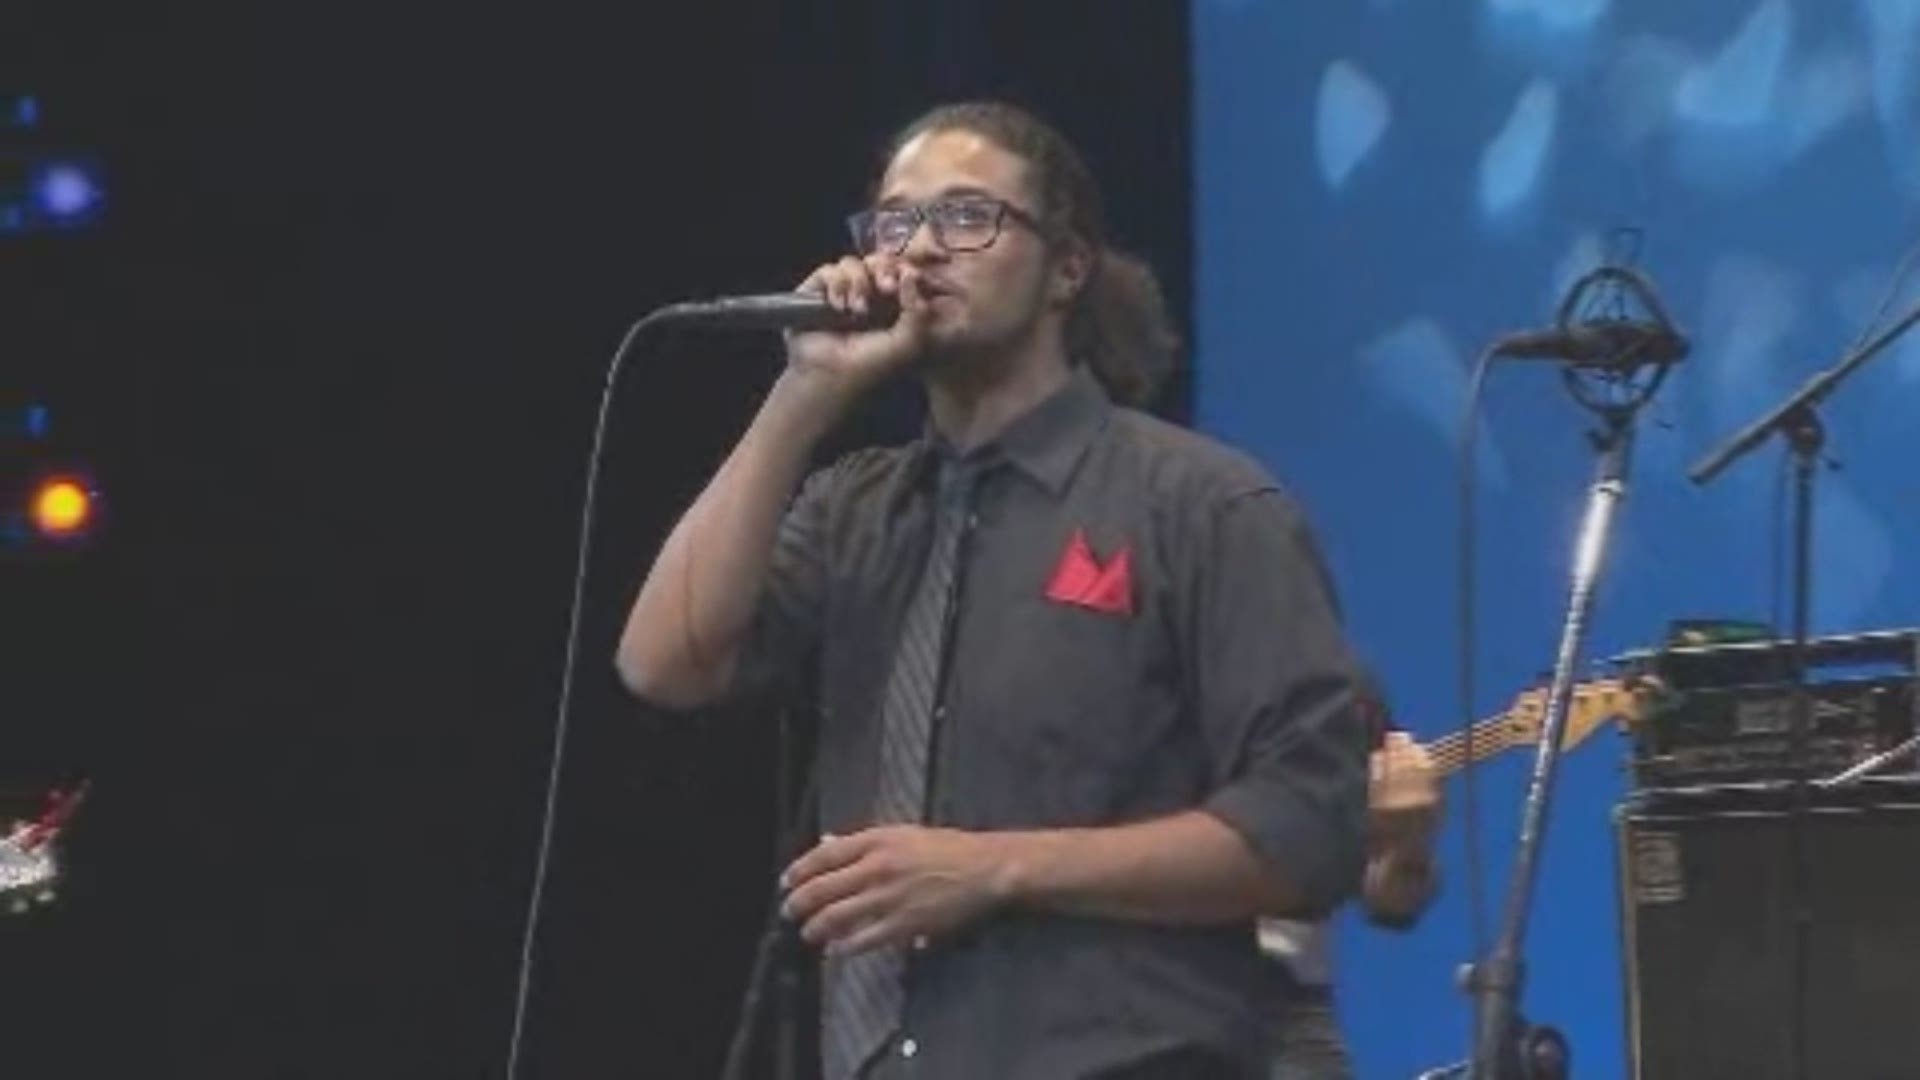 Cody Martin performs at the 65th Annual Crusade for Children